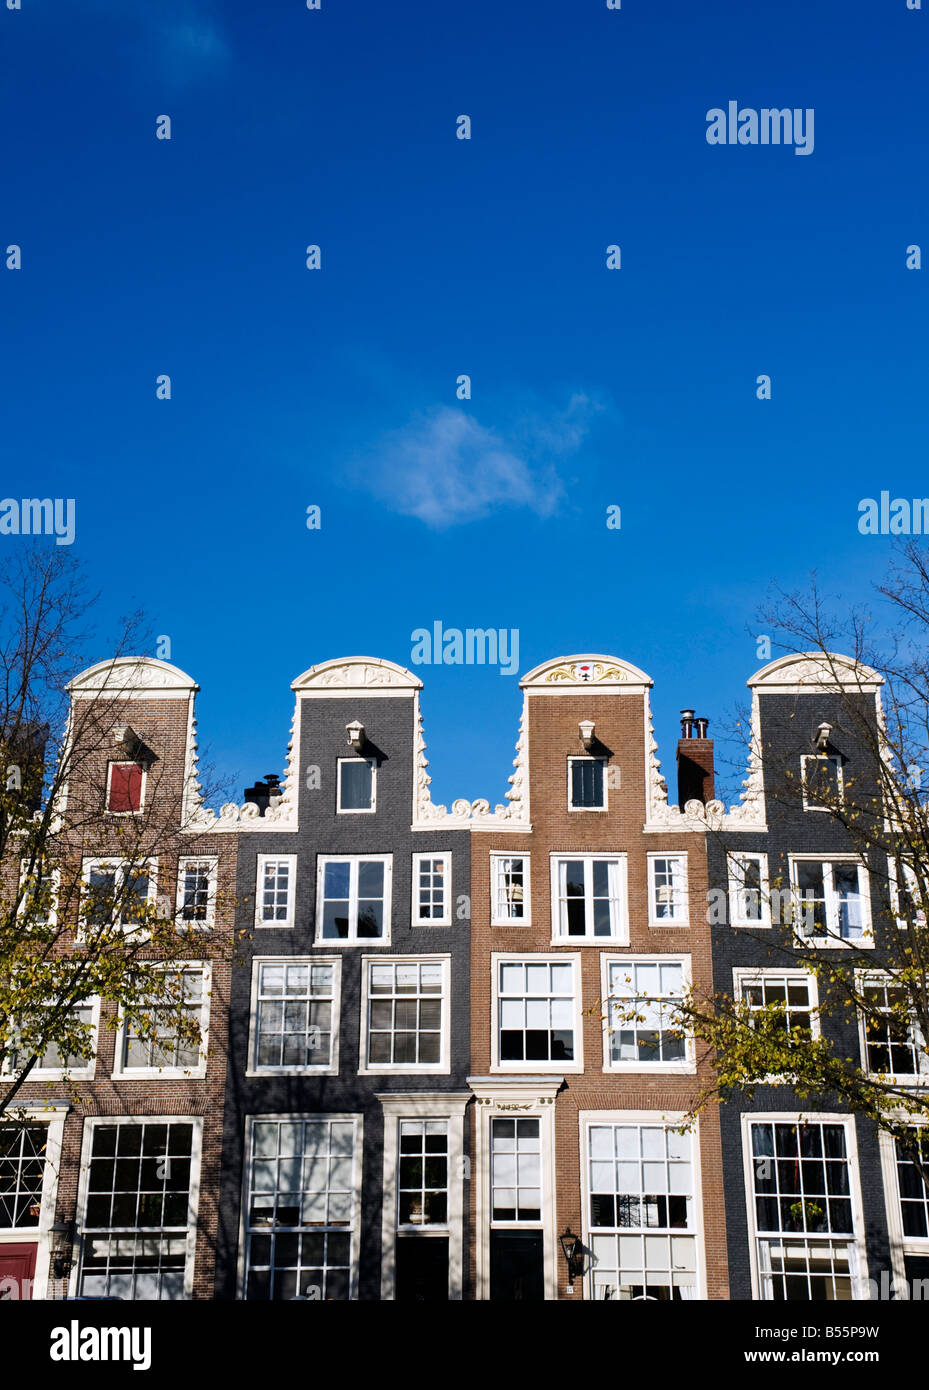 detail of gable roofs on old historic houses in  Amsterdam Netherlands 2008 Stock Photo